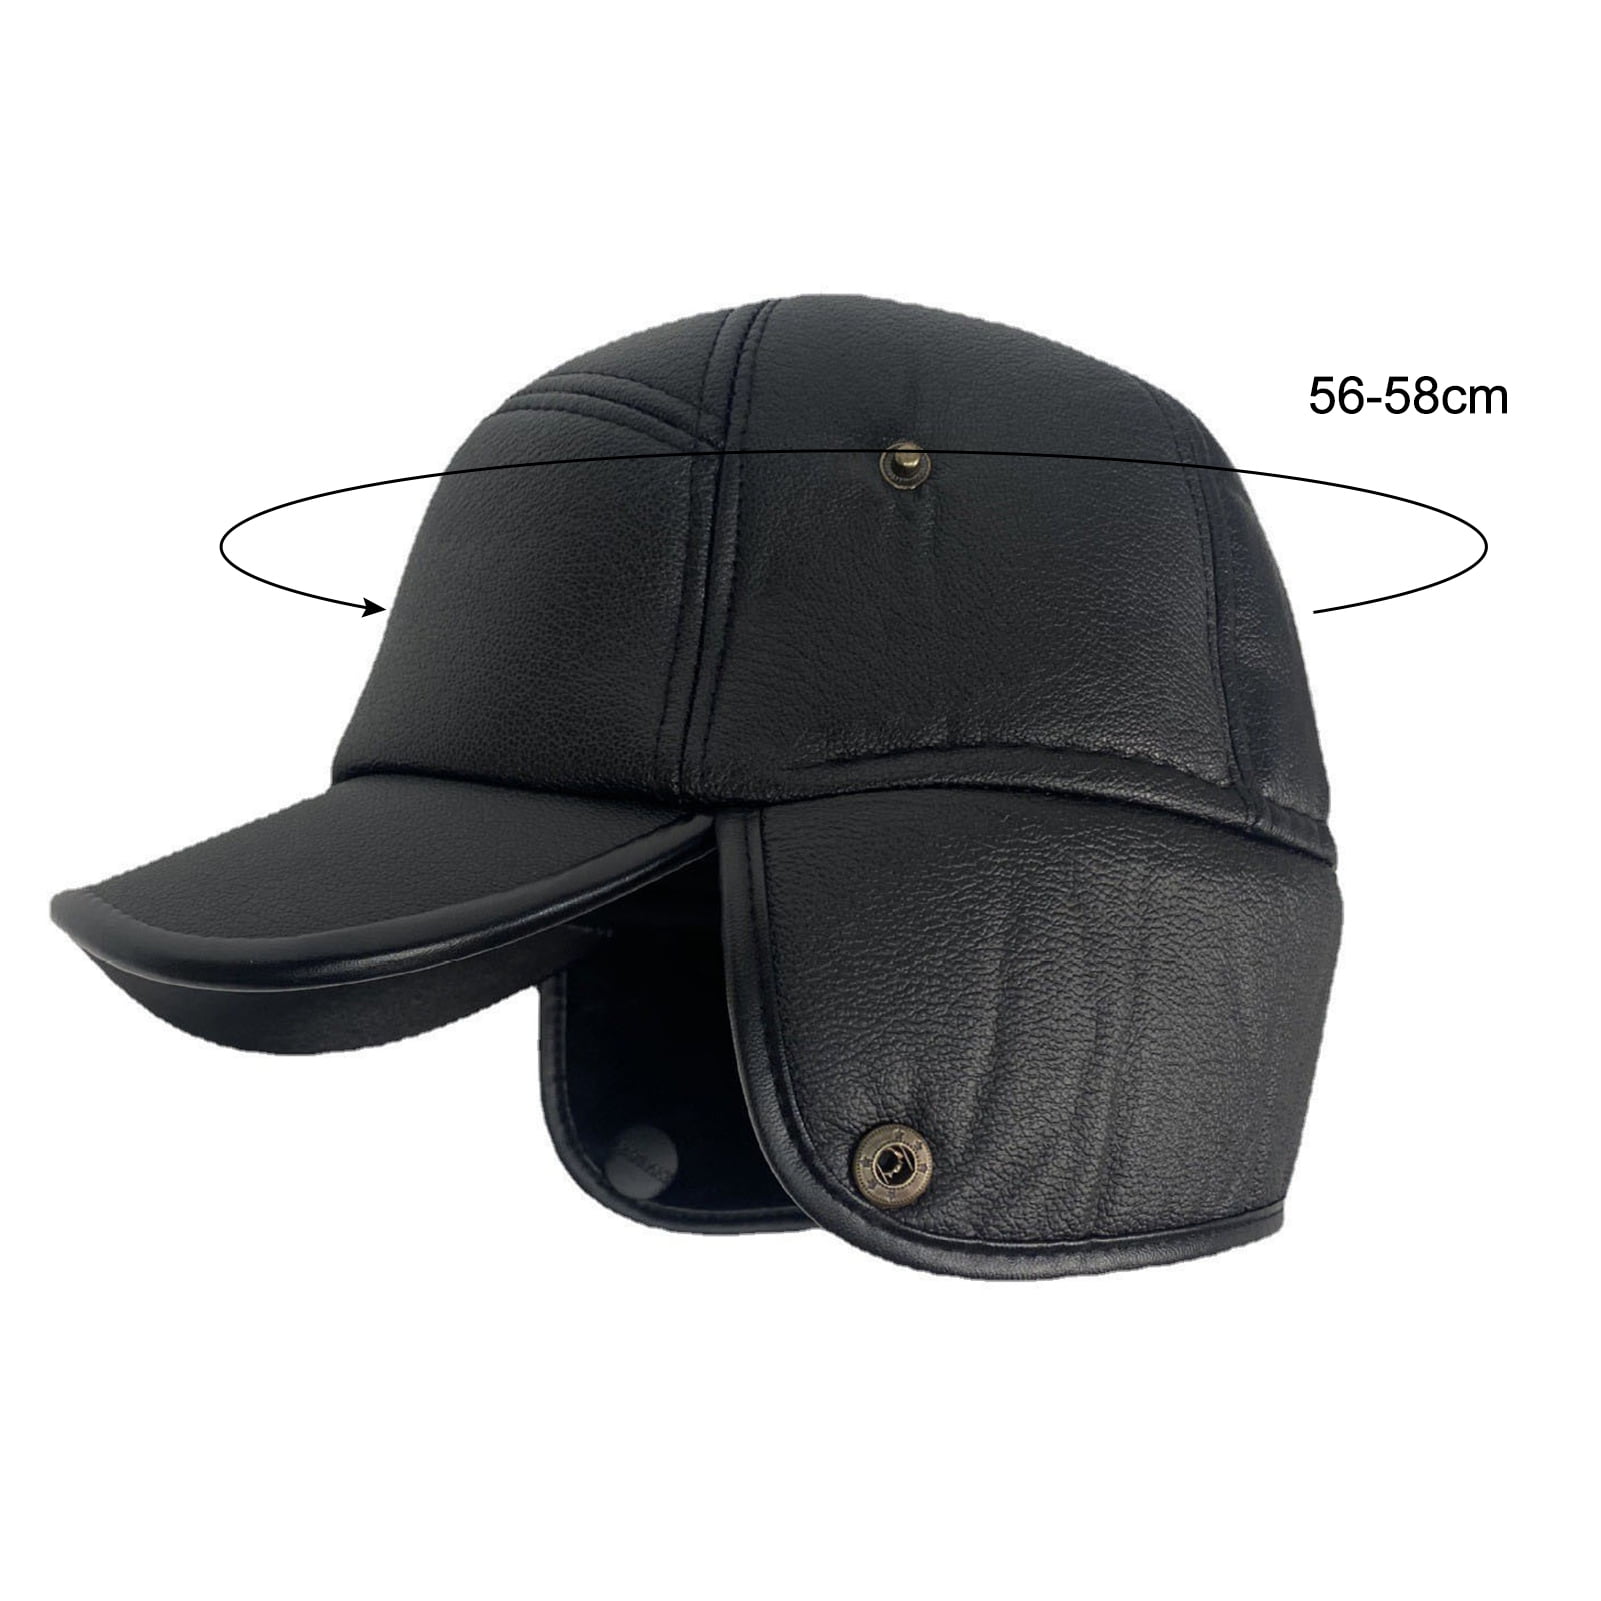 Cheap Warm Winter Cap Sport Golf Baseball Cap Hats For Men Casual Fashion  Dad Caps with Thicken Earflaps